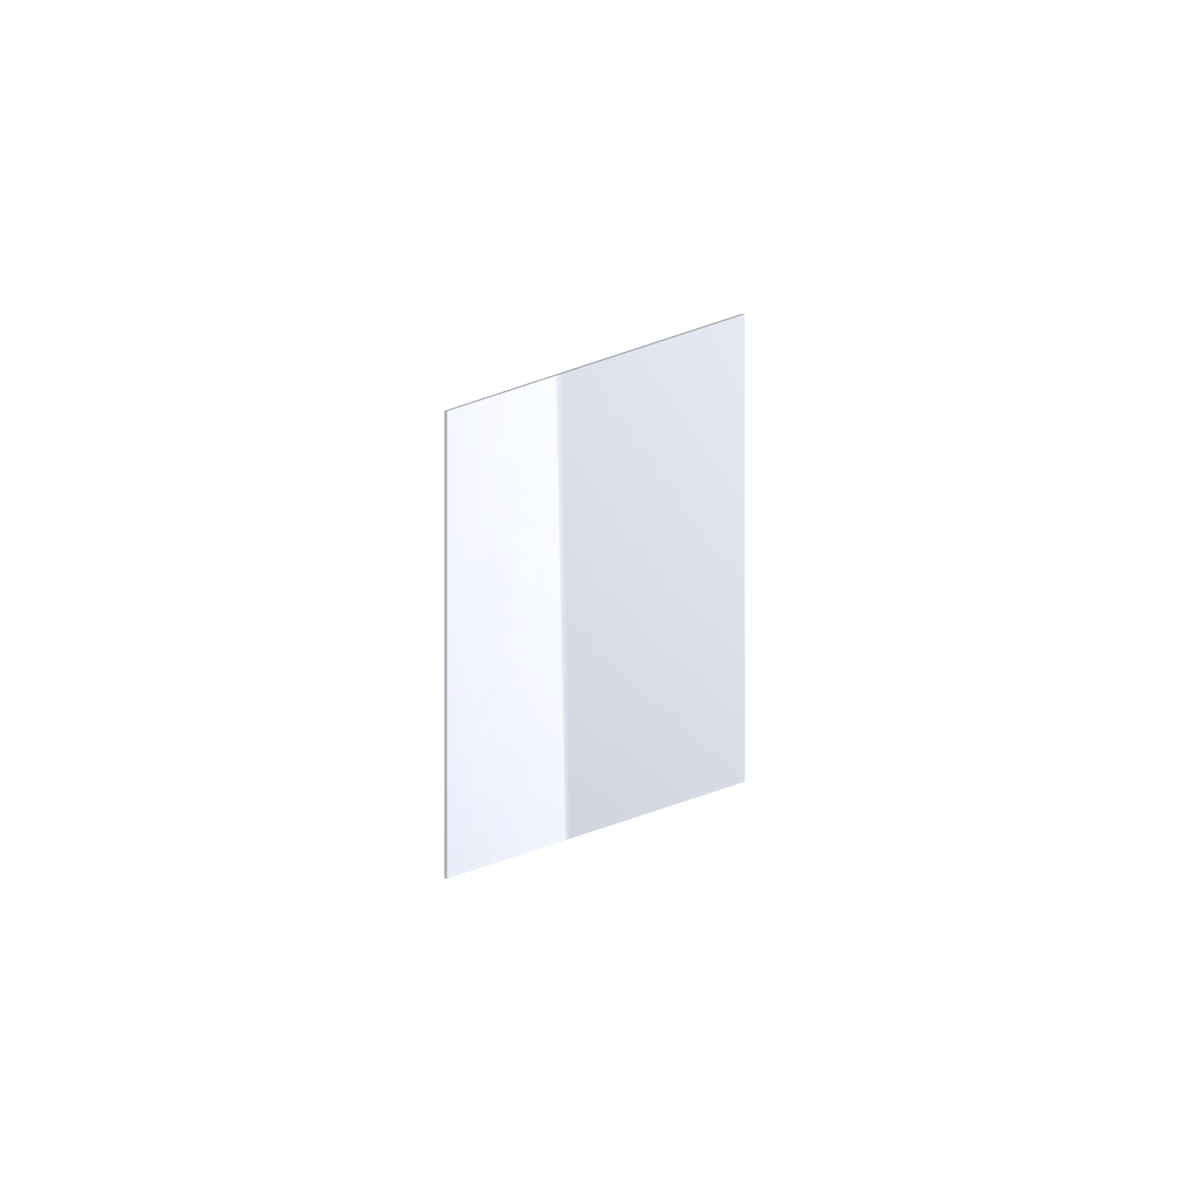 Care Mirror, 600 x 5 x 600 mm, Colourless